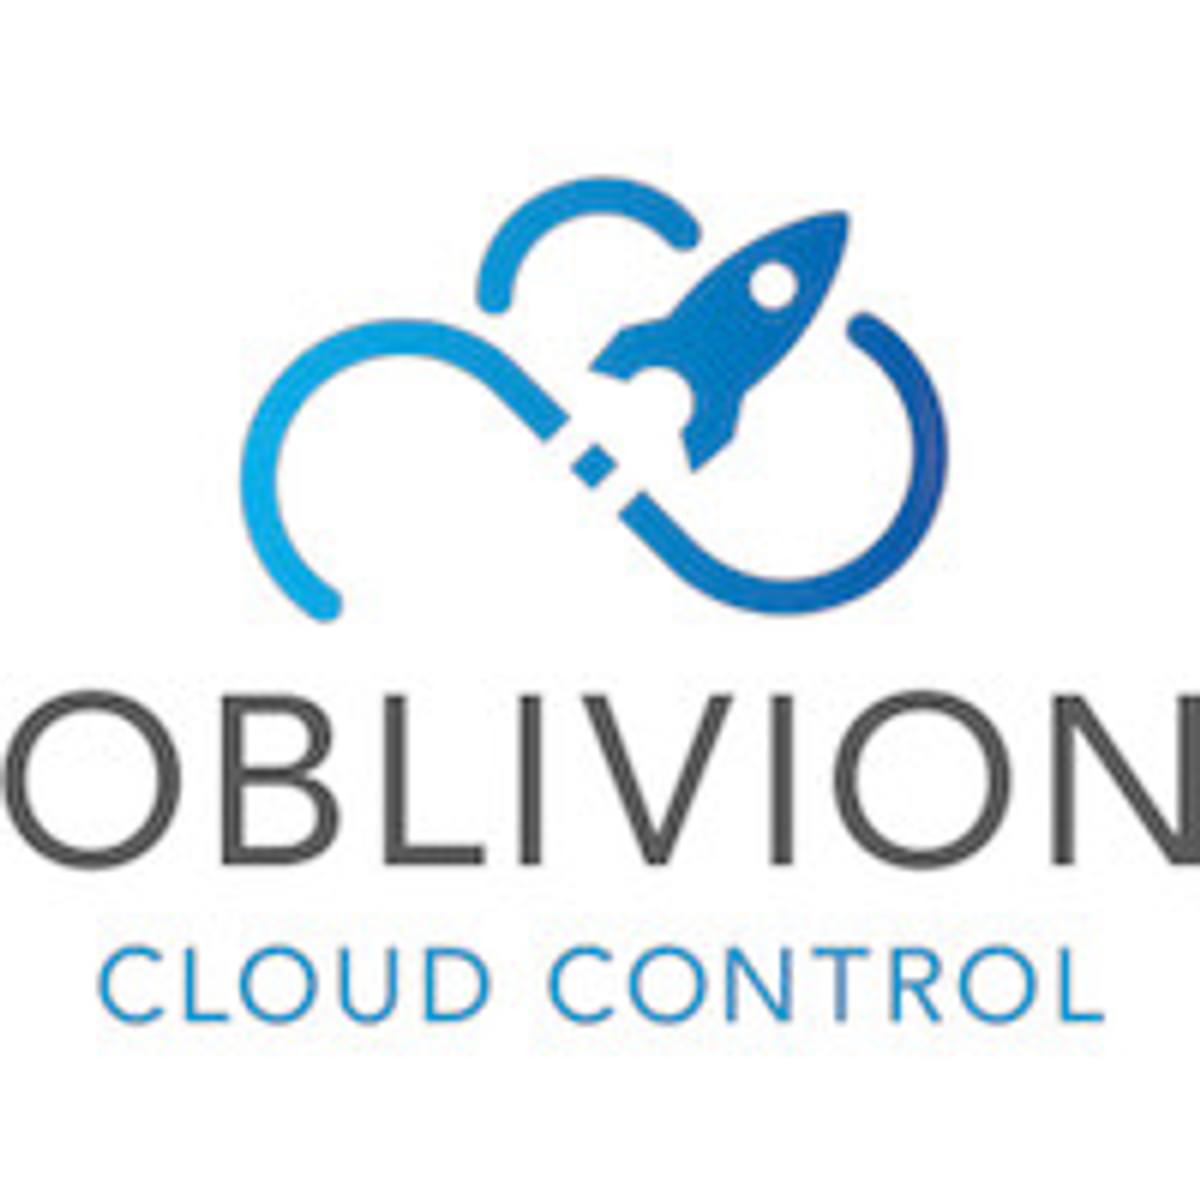 Oblivion is AWS Consulting Partner and Migration Partner of the Year 2021 image